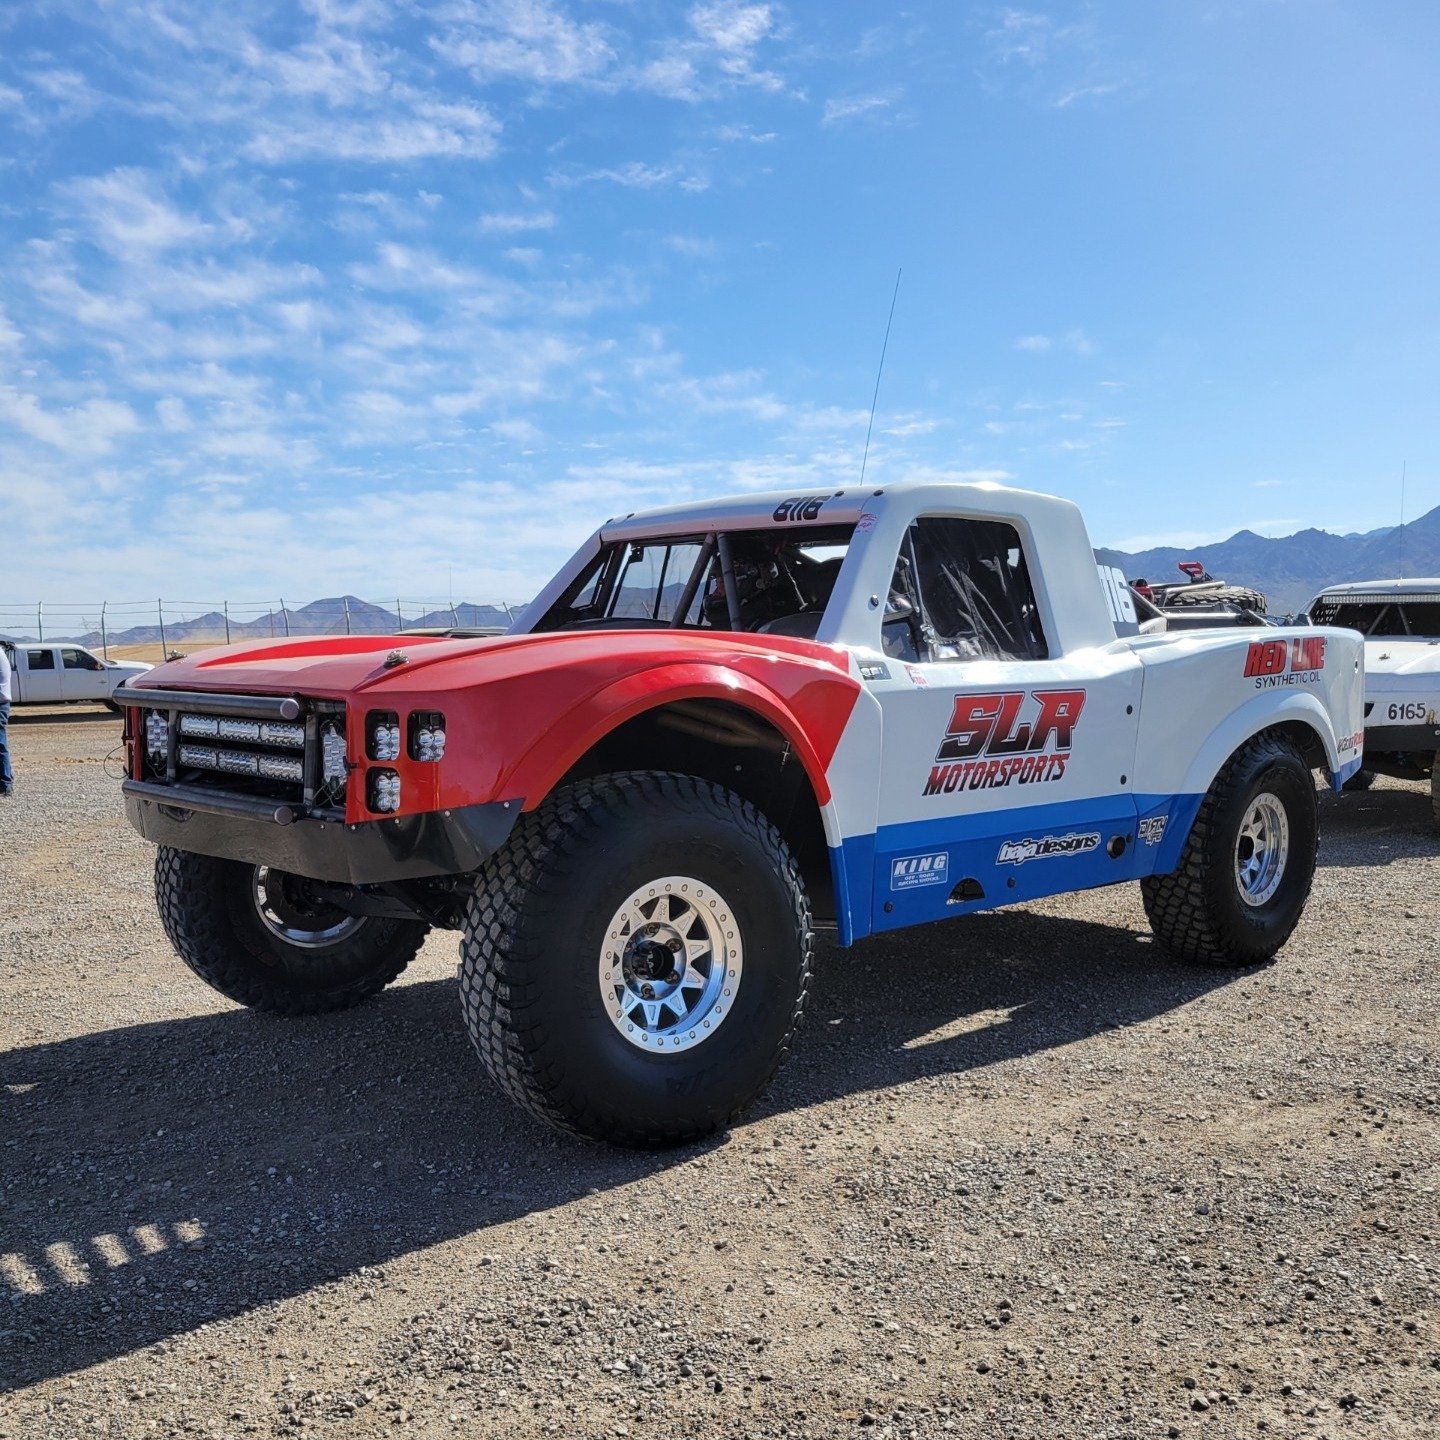 Goodluck to Team SLR Motorsports as they gear up for the SNORE, Battle at Primm! We're excited to see them in action with the Dirty Life 9400, Roadkill Forged Wheels. Best of luck out there on the course! 🏁🚗 @slr.motorsports

#dirtylifewheels #dirt